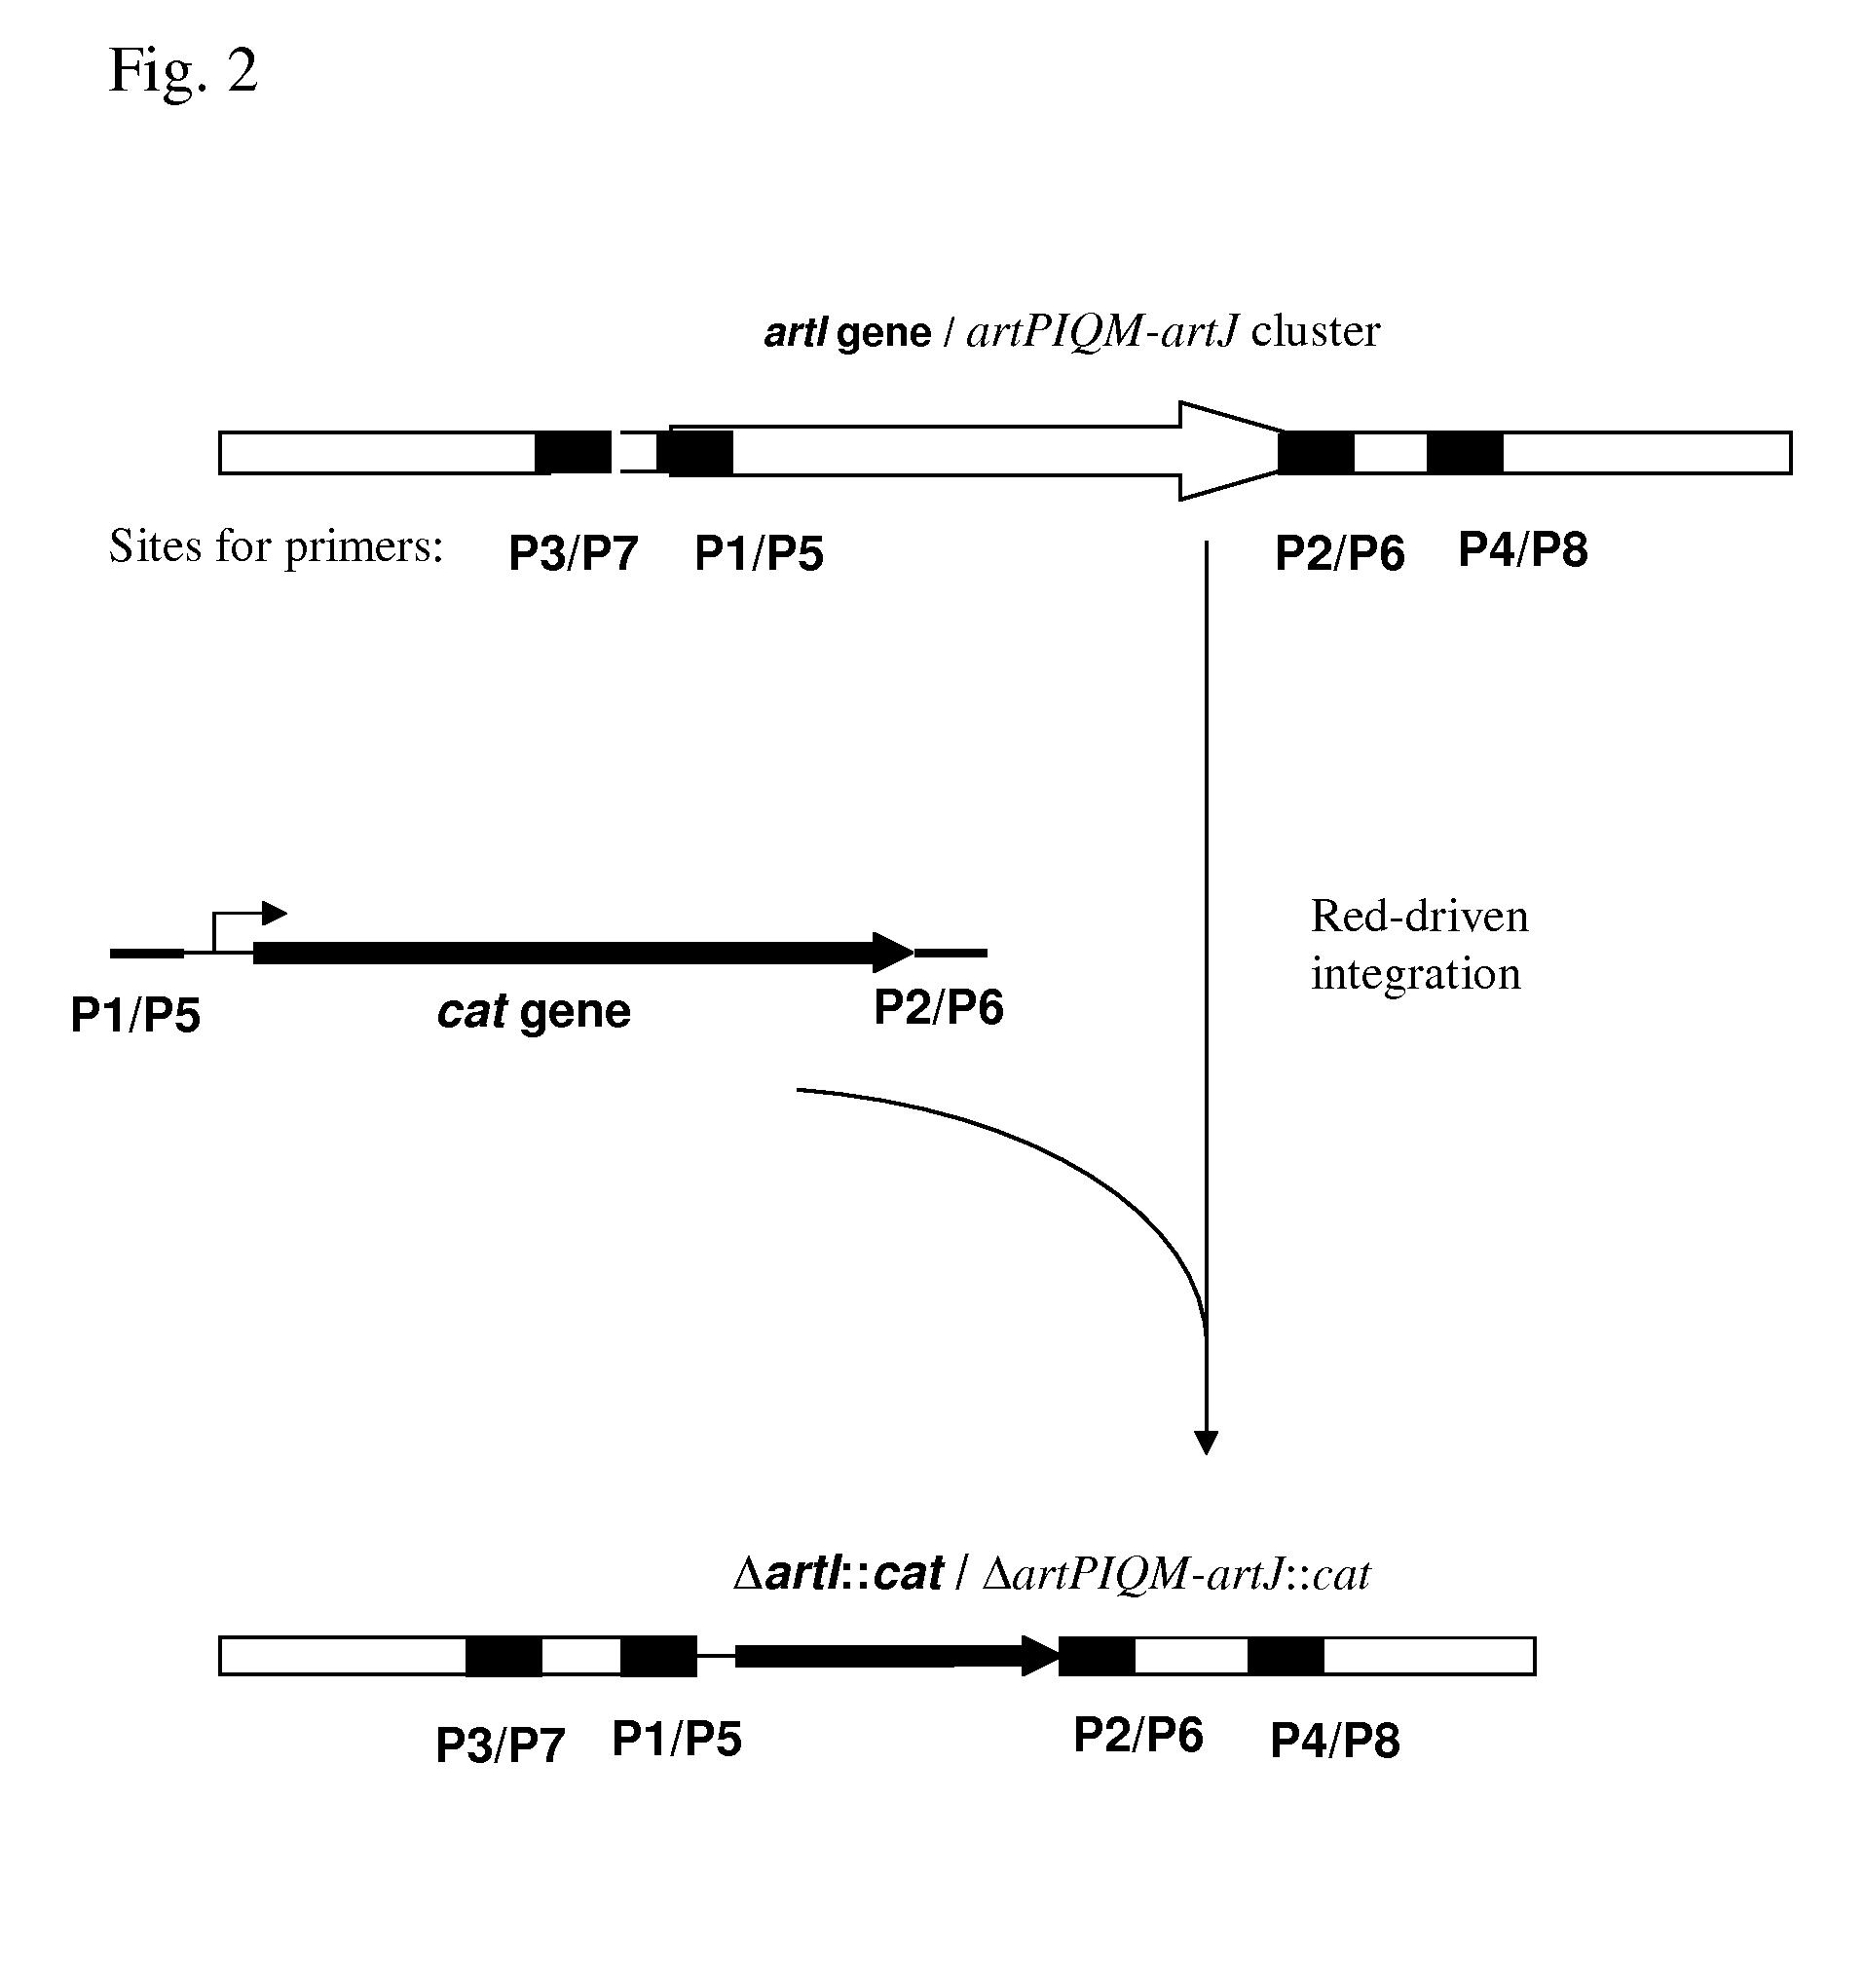 Method for producing l-arginine using a bacterium of enterobacteriaceae family, having attenuated expression of a gene encoding an l-arginine transporter